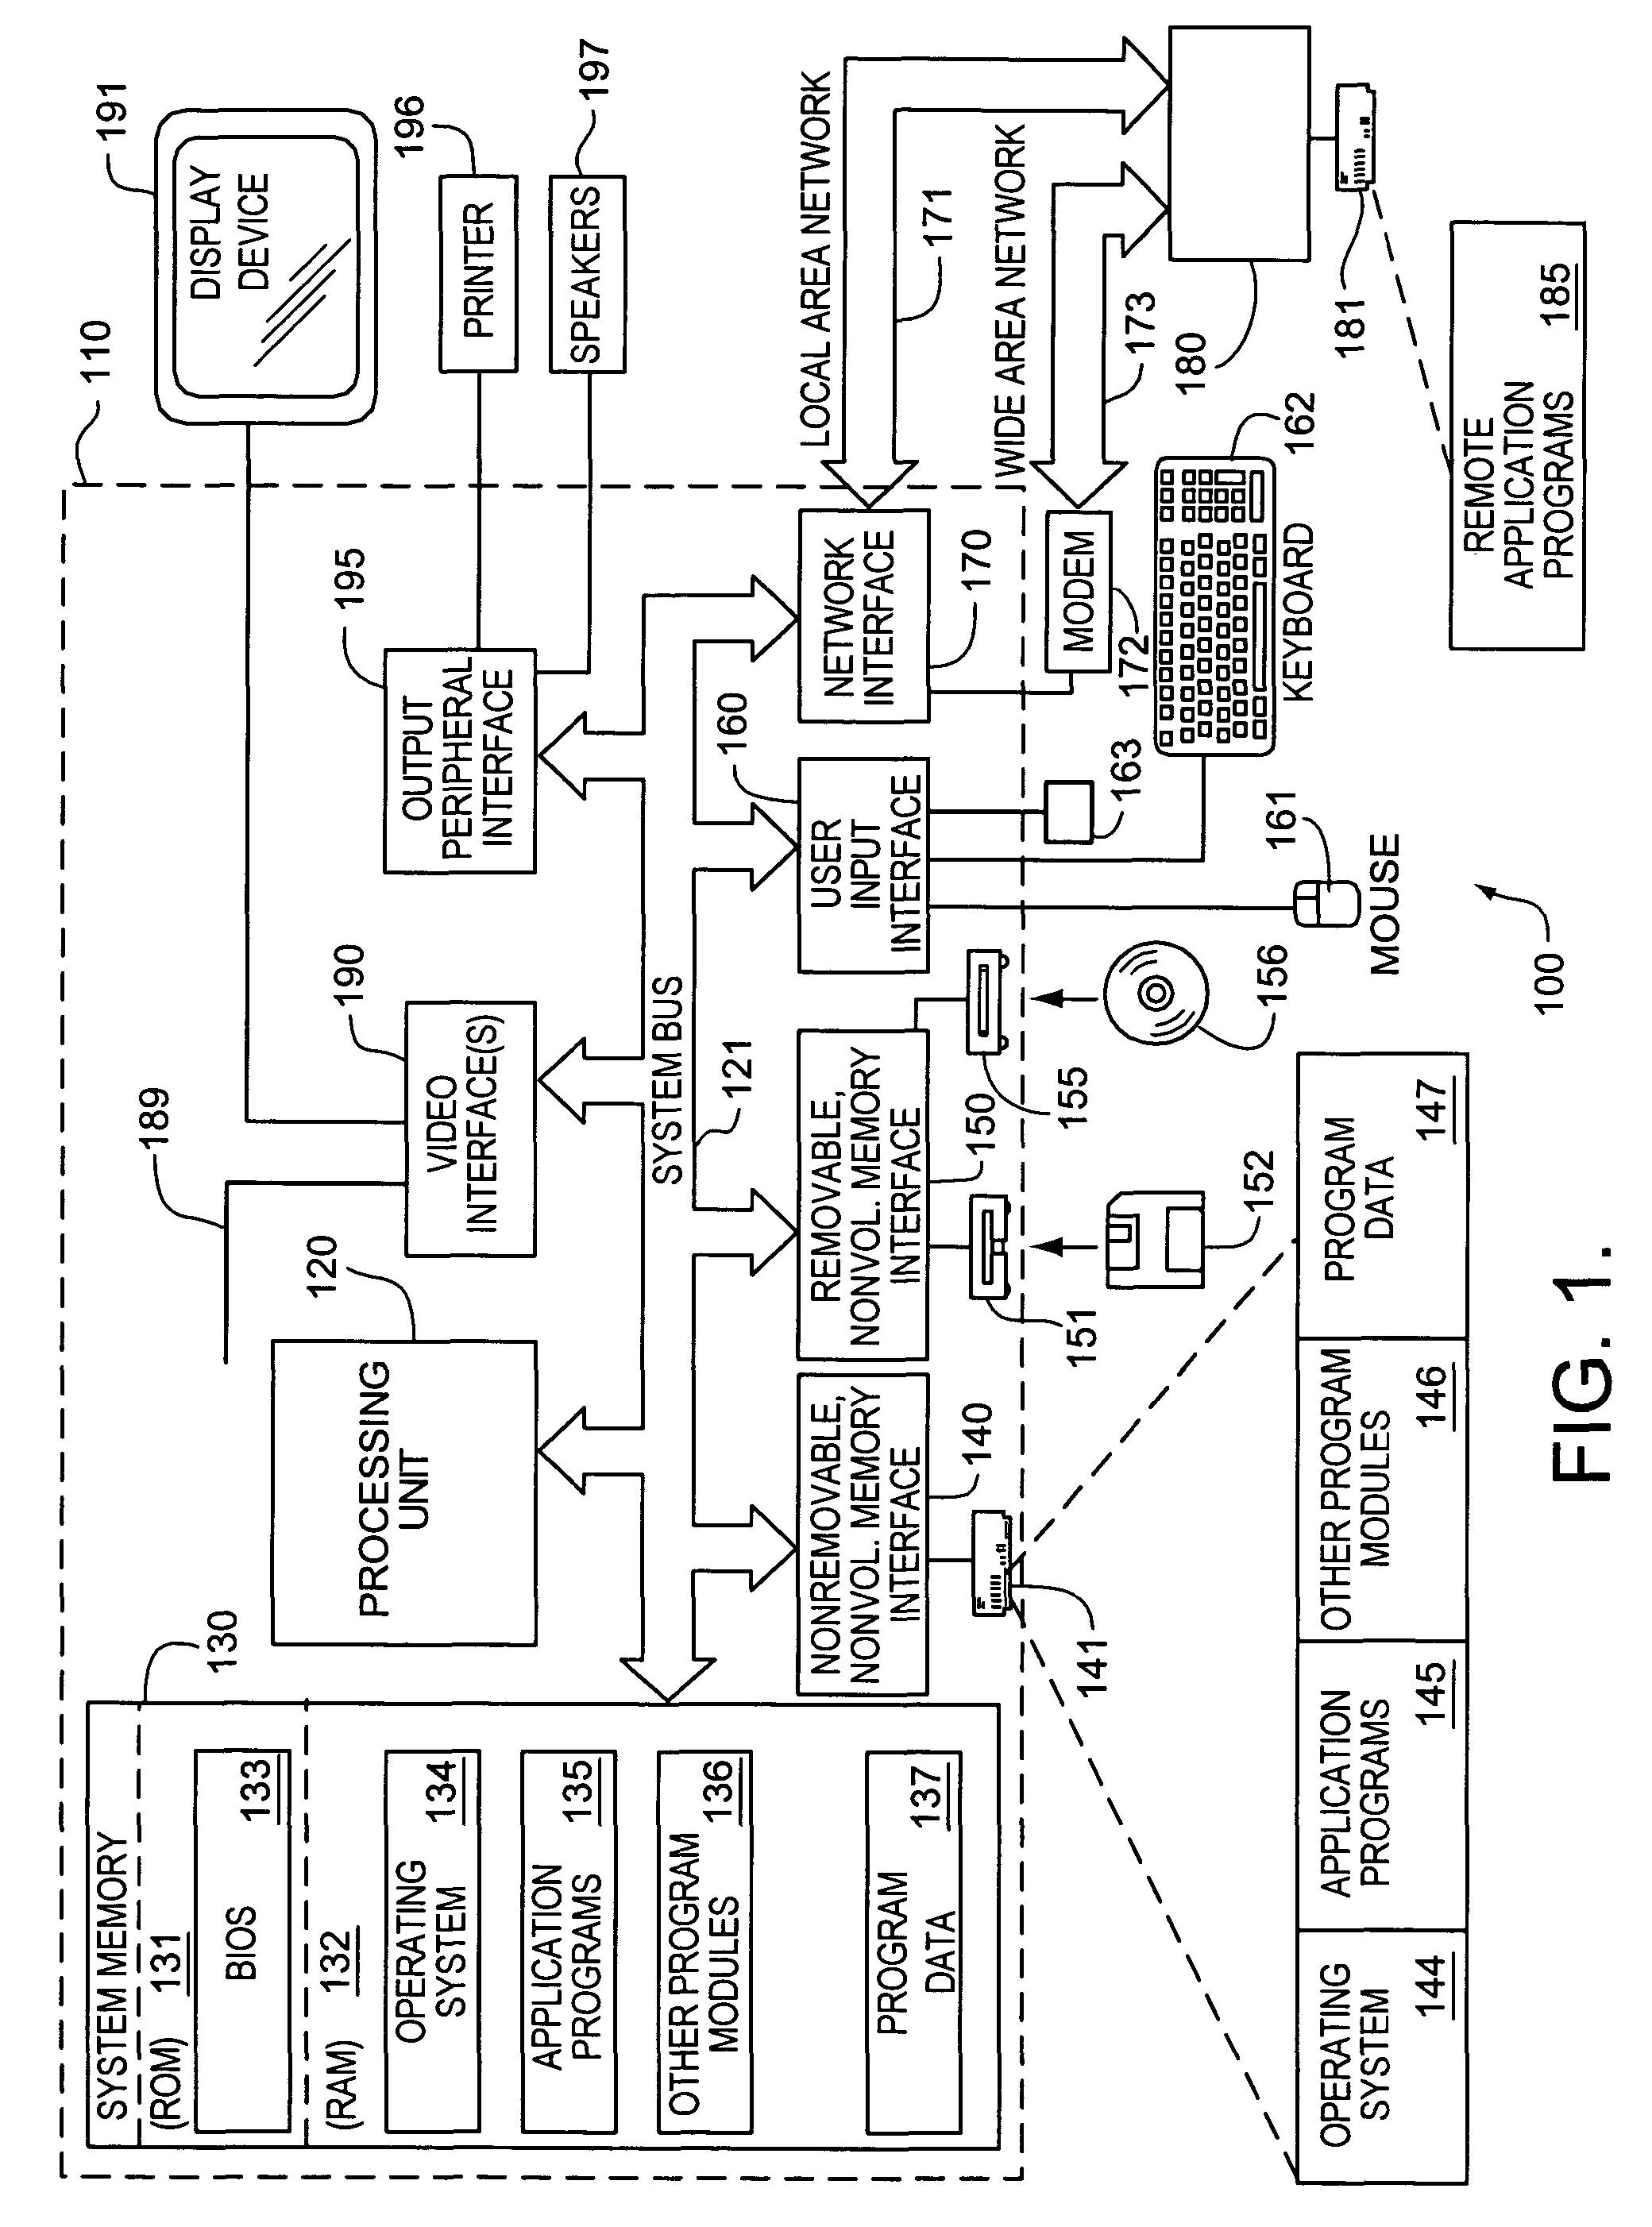 System and method for navigation of content in multiple display regions